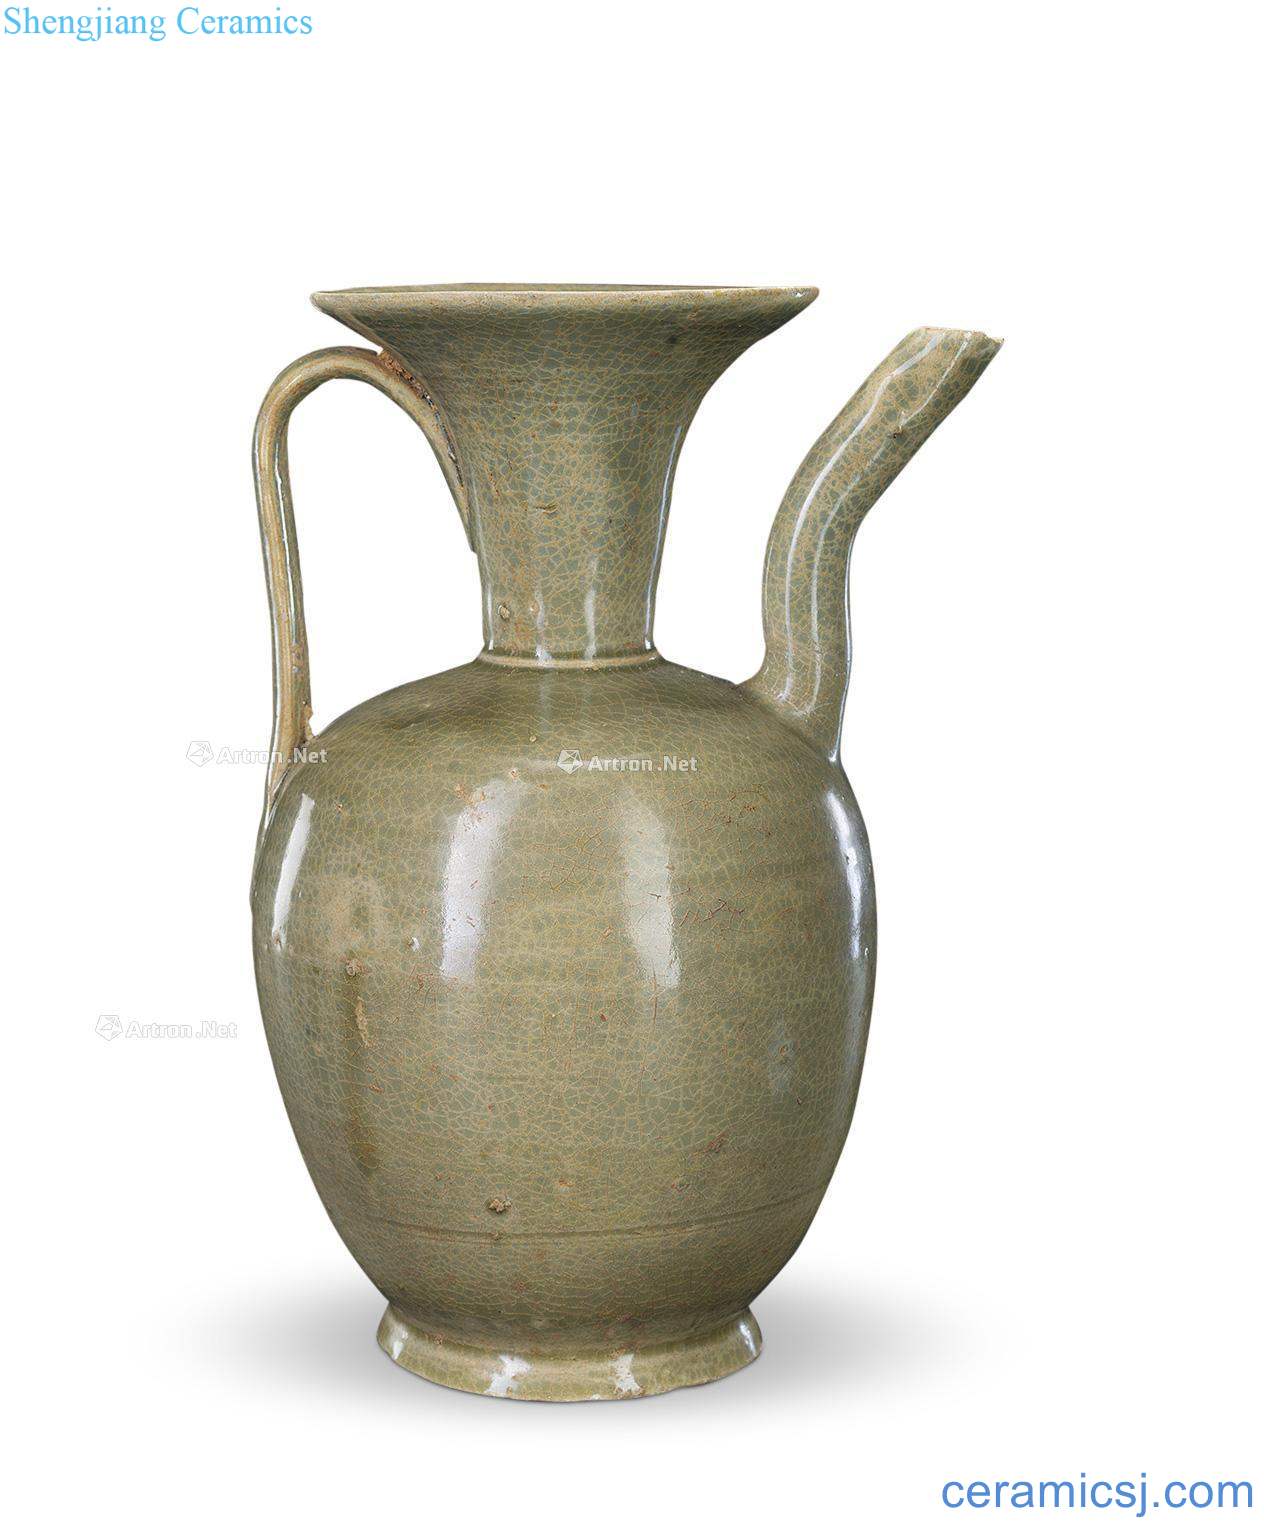 The song of the kiln ewer